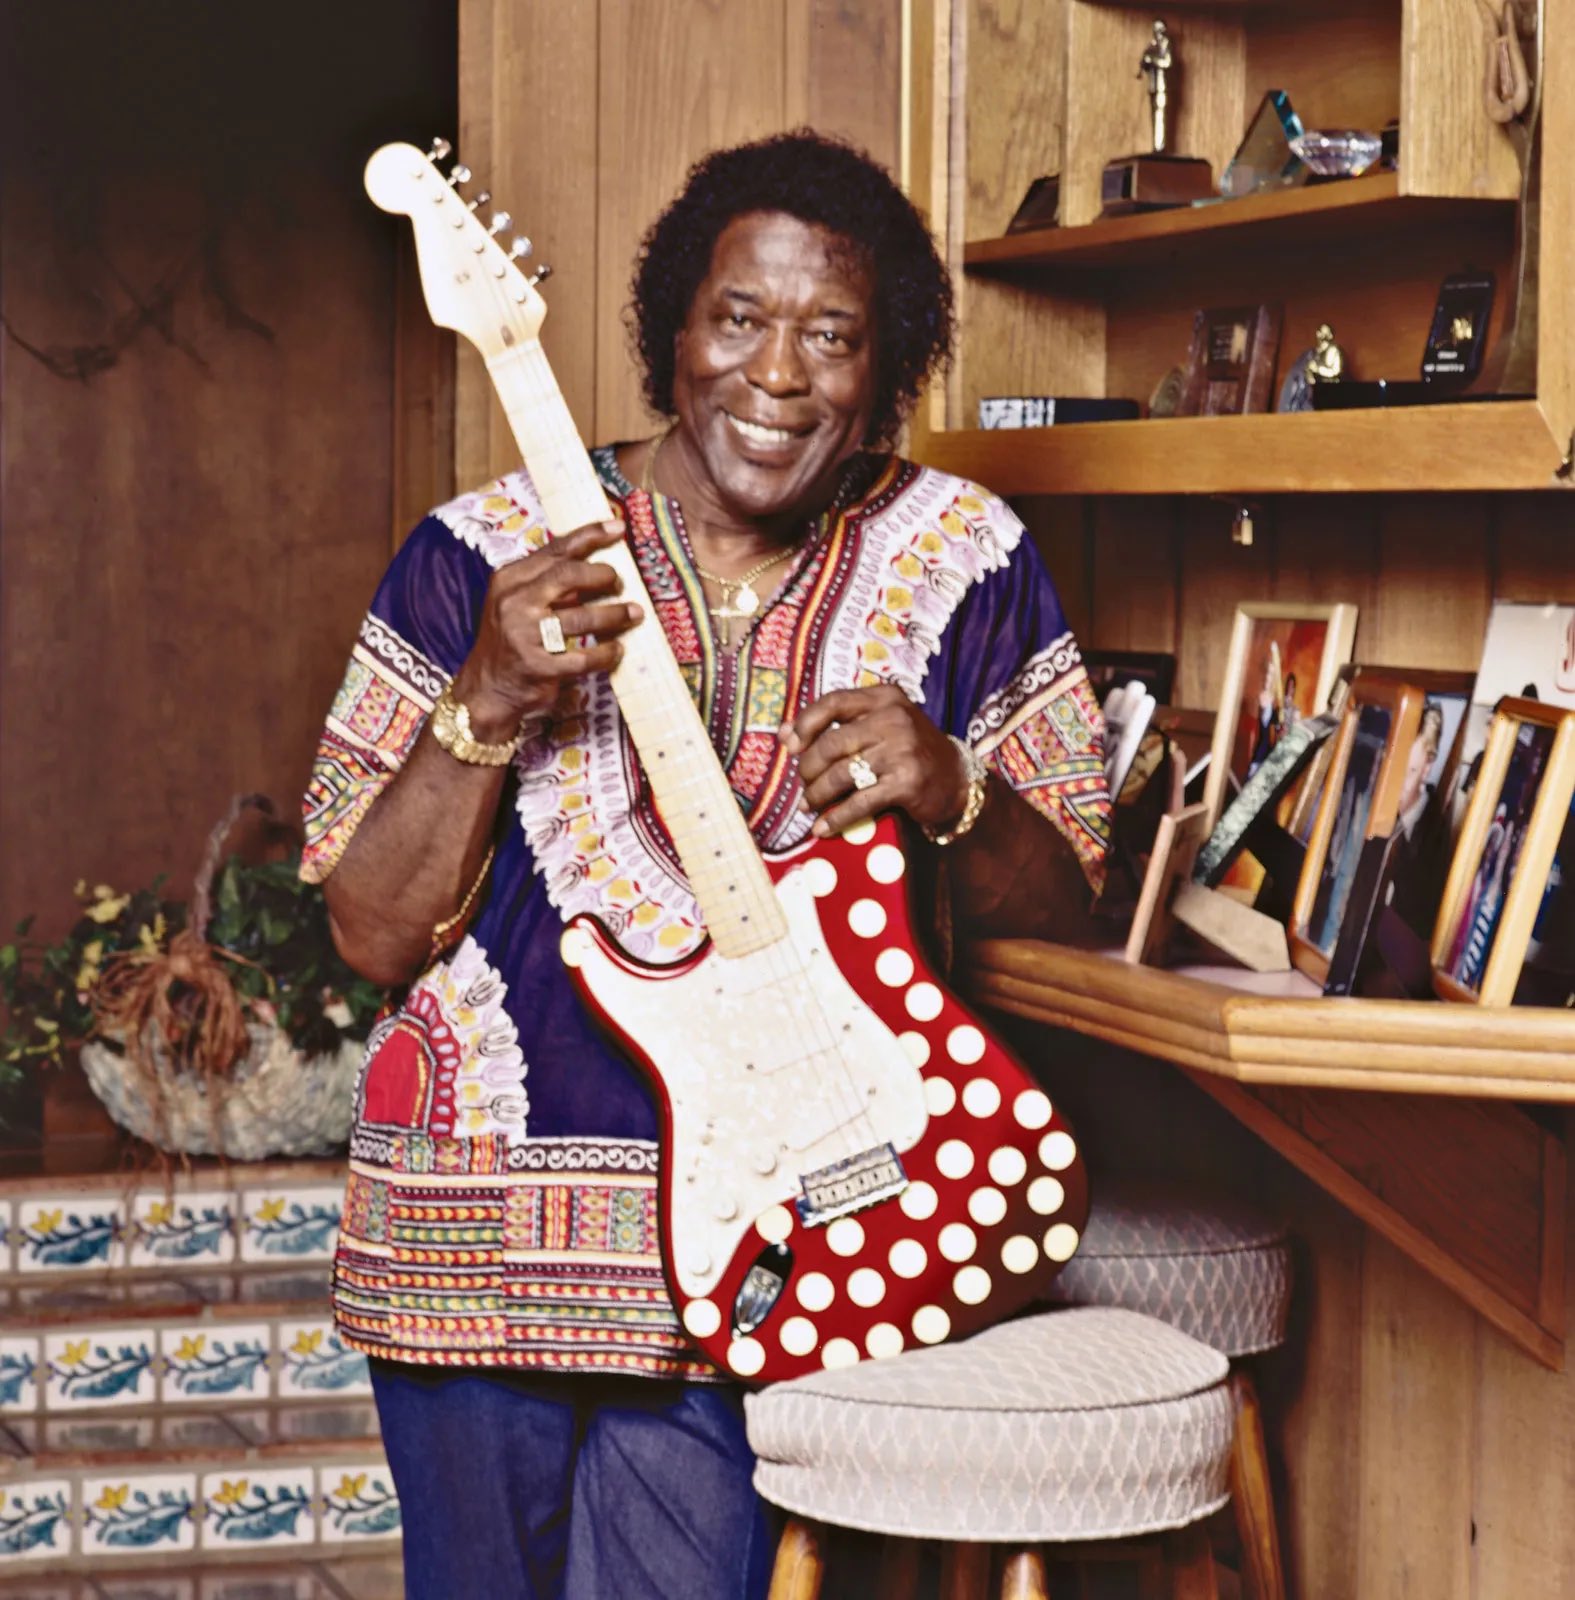 We lost two icons today, but Buddy Guy is still here and he turned 86 today. Happy birthday to a true legend. 